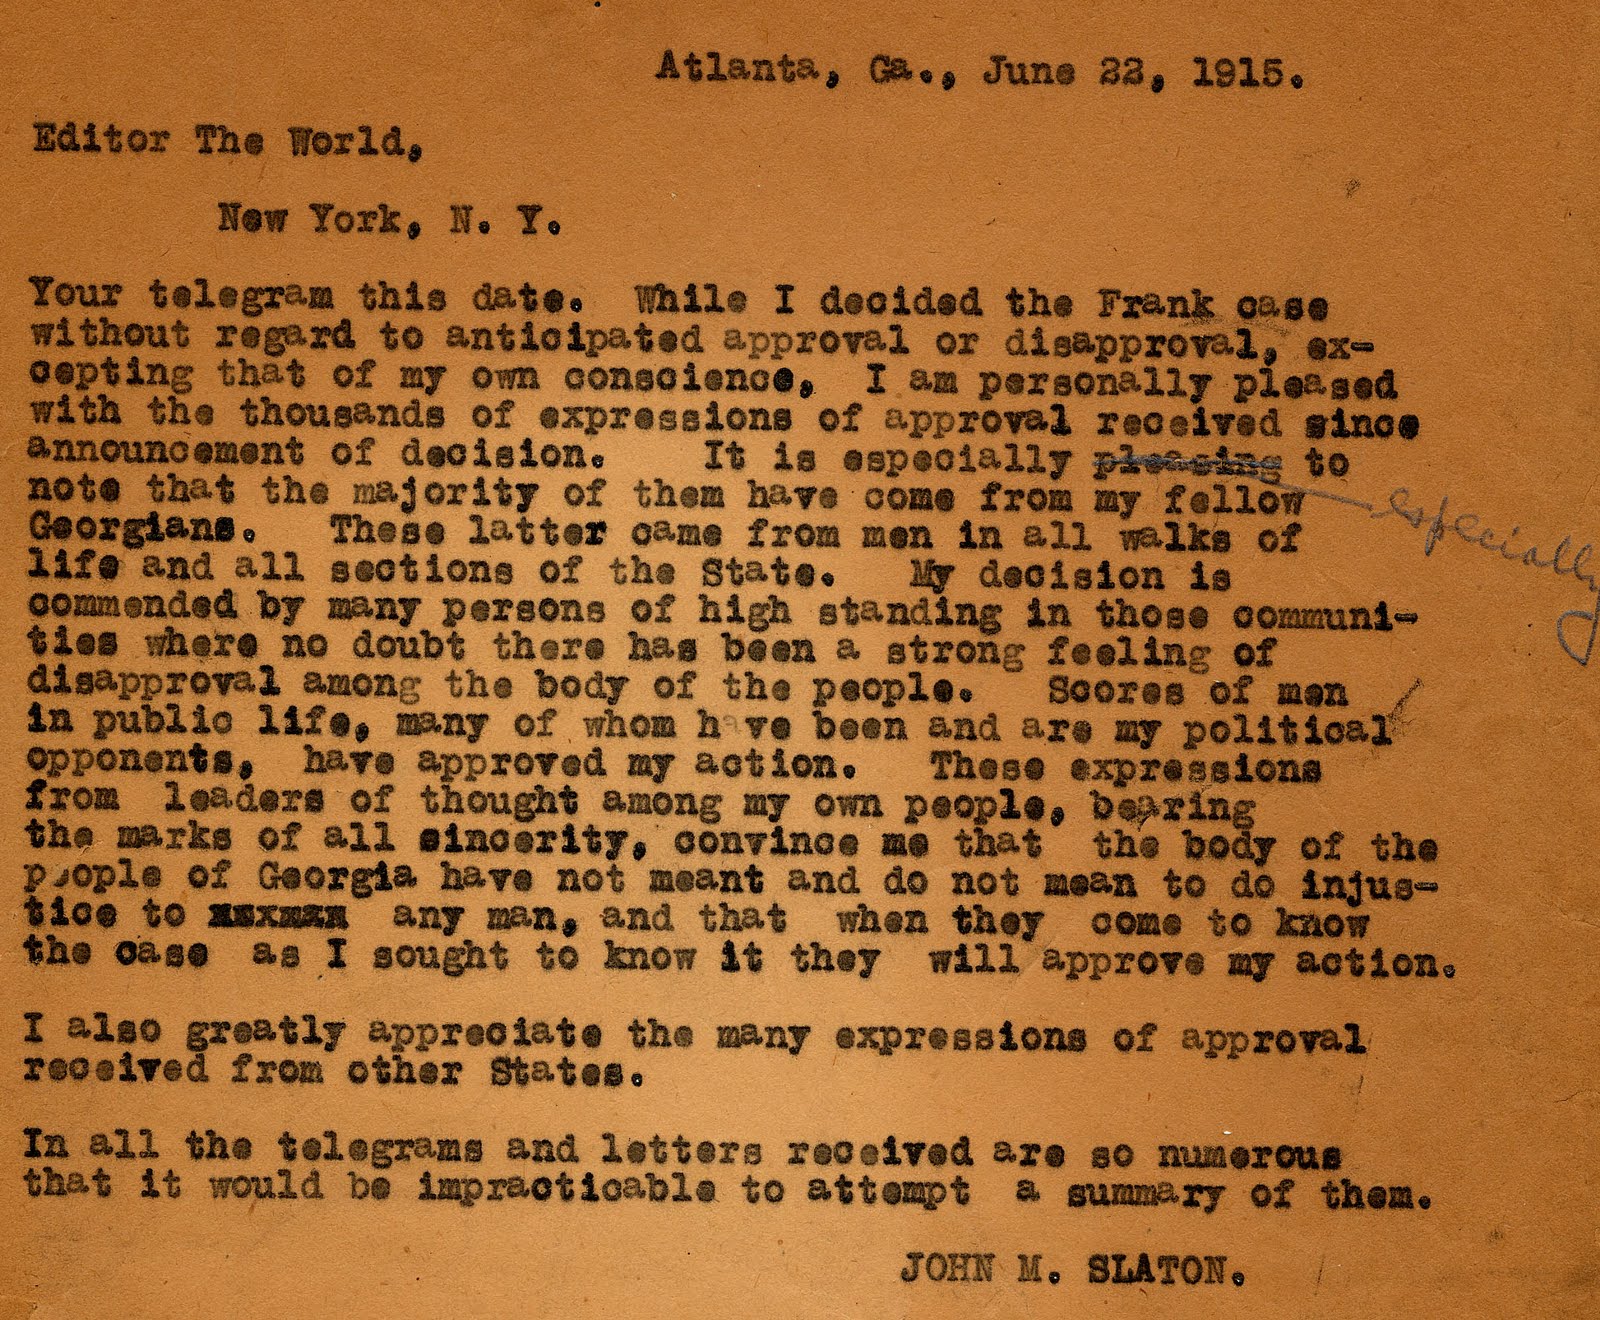 Telegram from Honor John M. Slaton to Editor of The World where he defends his decision to not give Leo Frank clemency (June 22,1915)